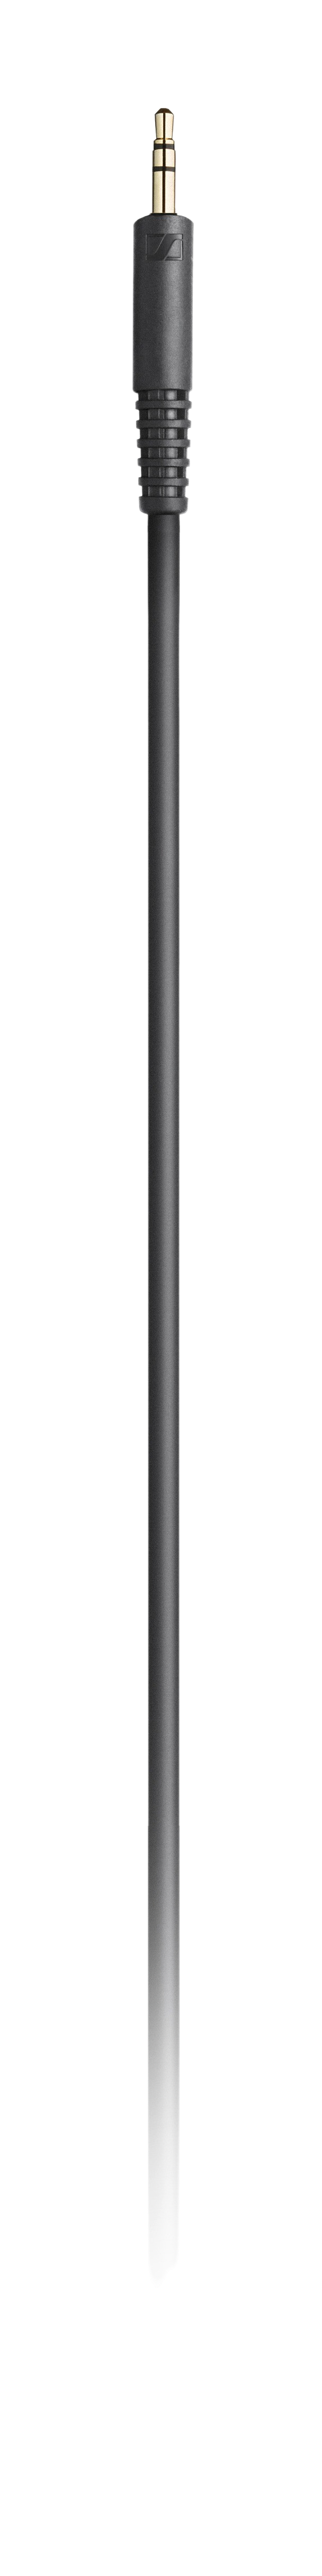 HD_200_PRO_Product_shot_cutout_jack_cable.png